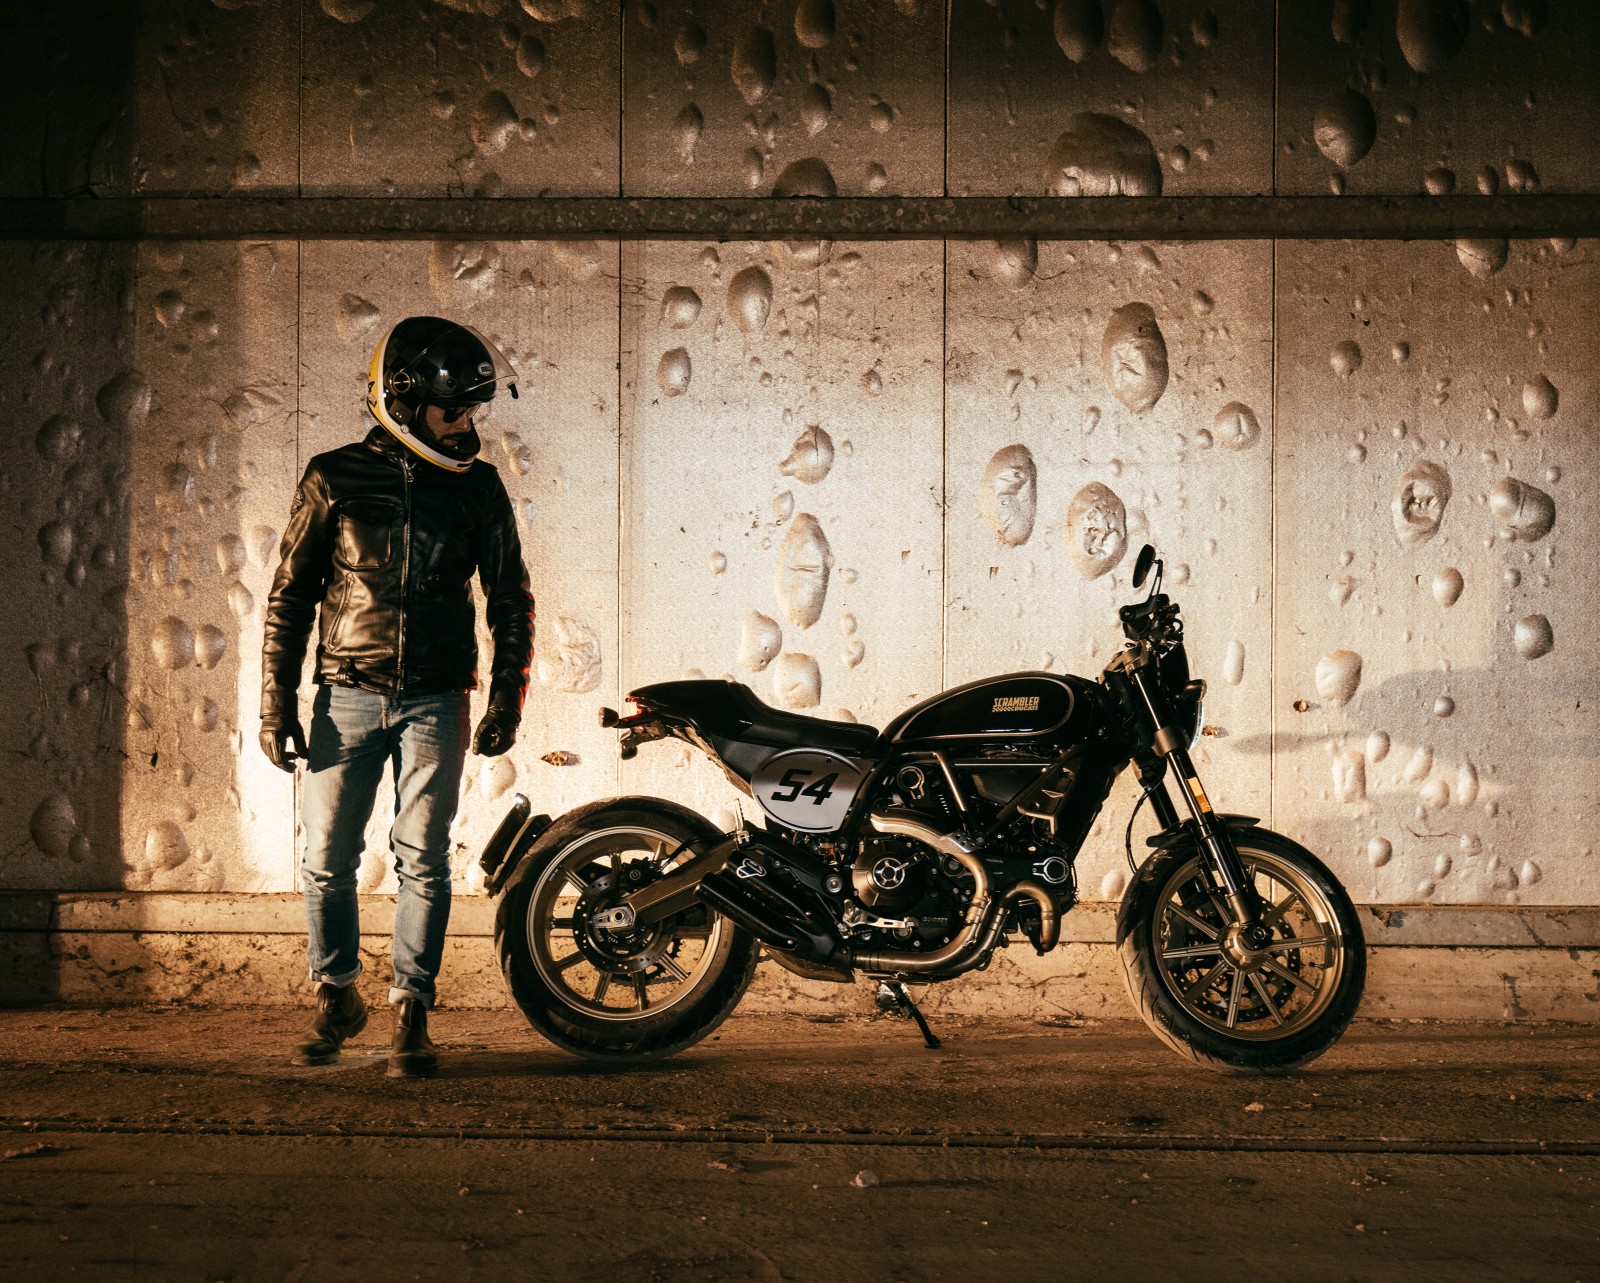 Ranking the best Scrambler motorcycles for 2022